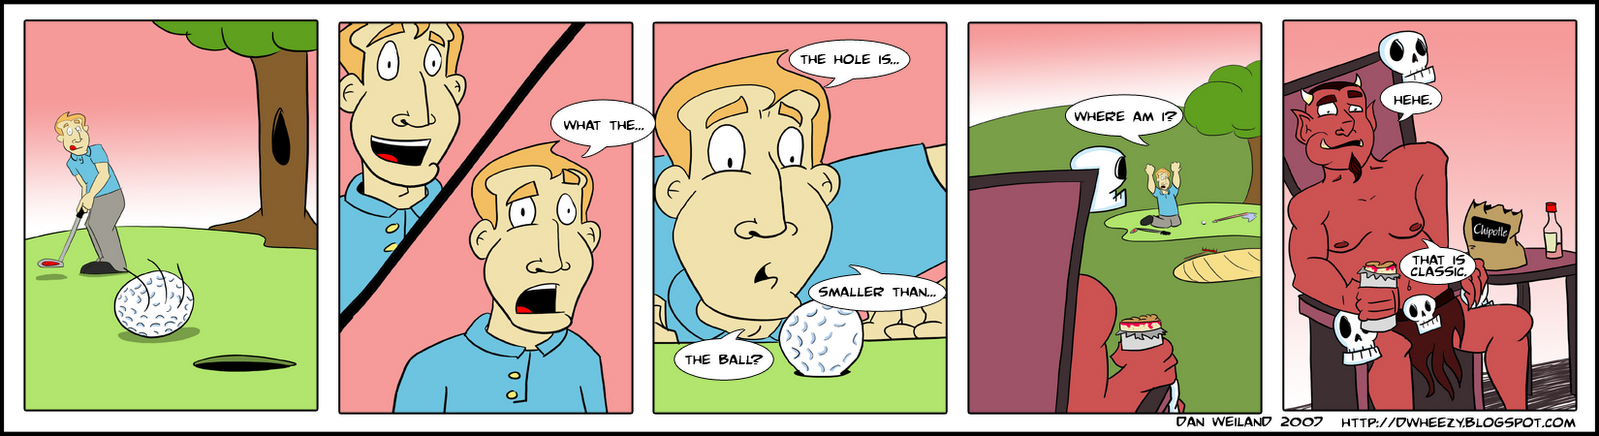 [GolfHell.png]